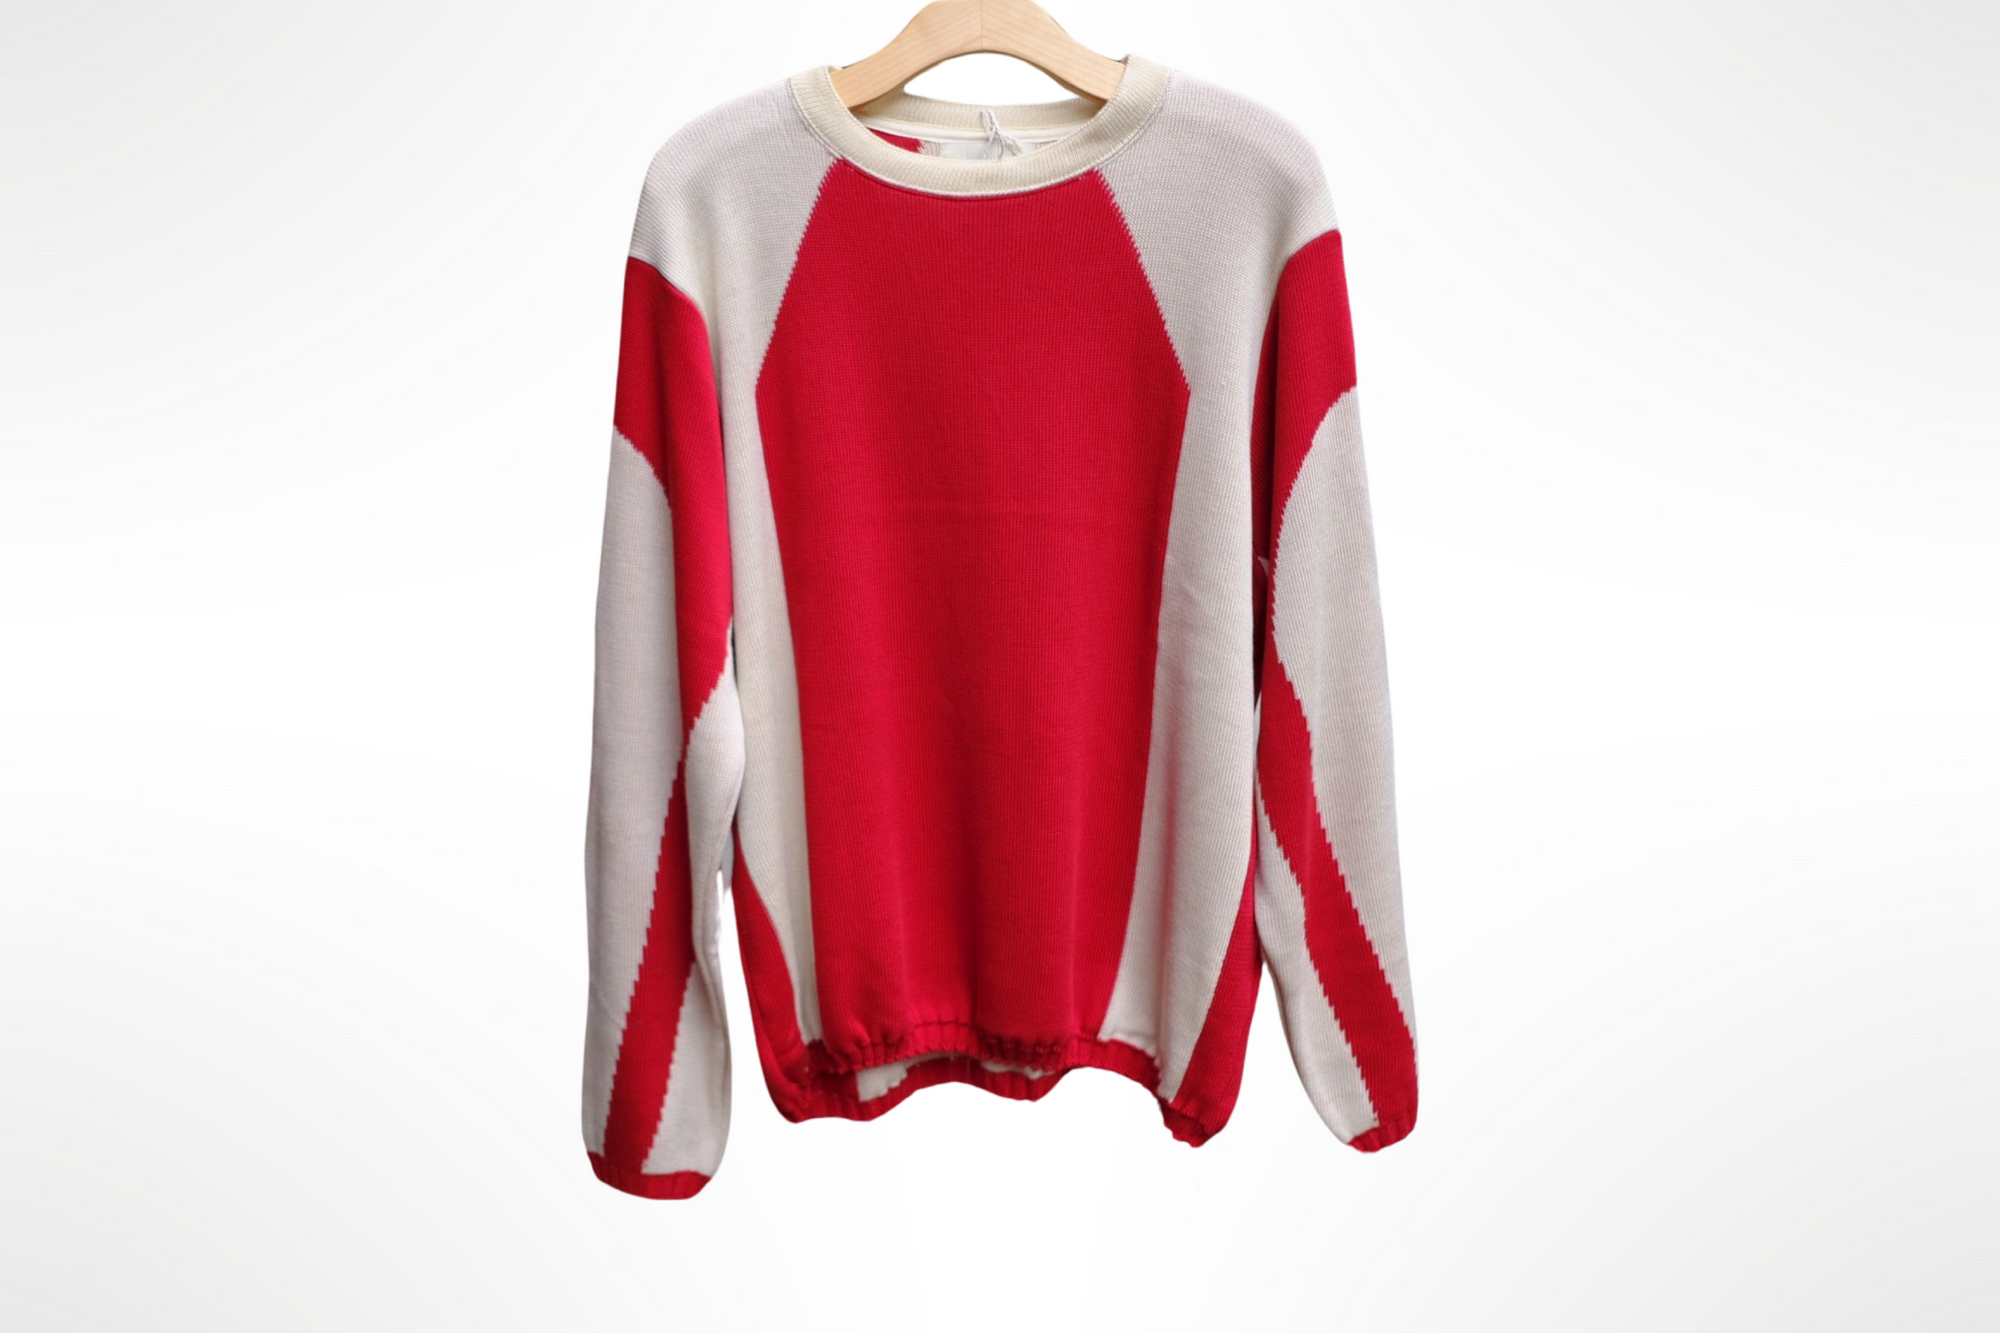 racer sweater in red & white